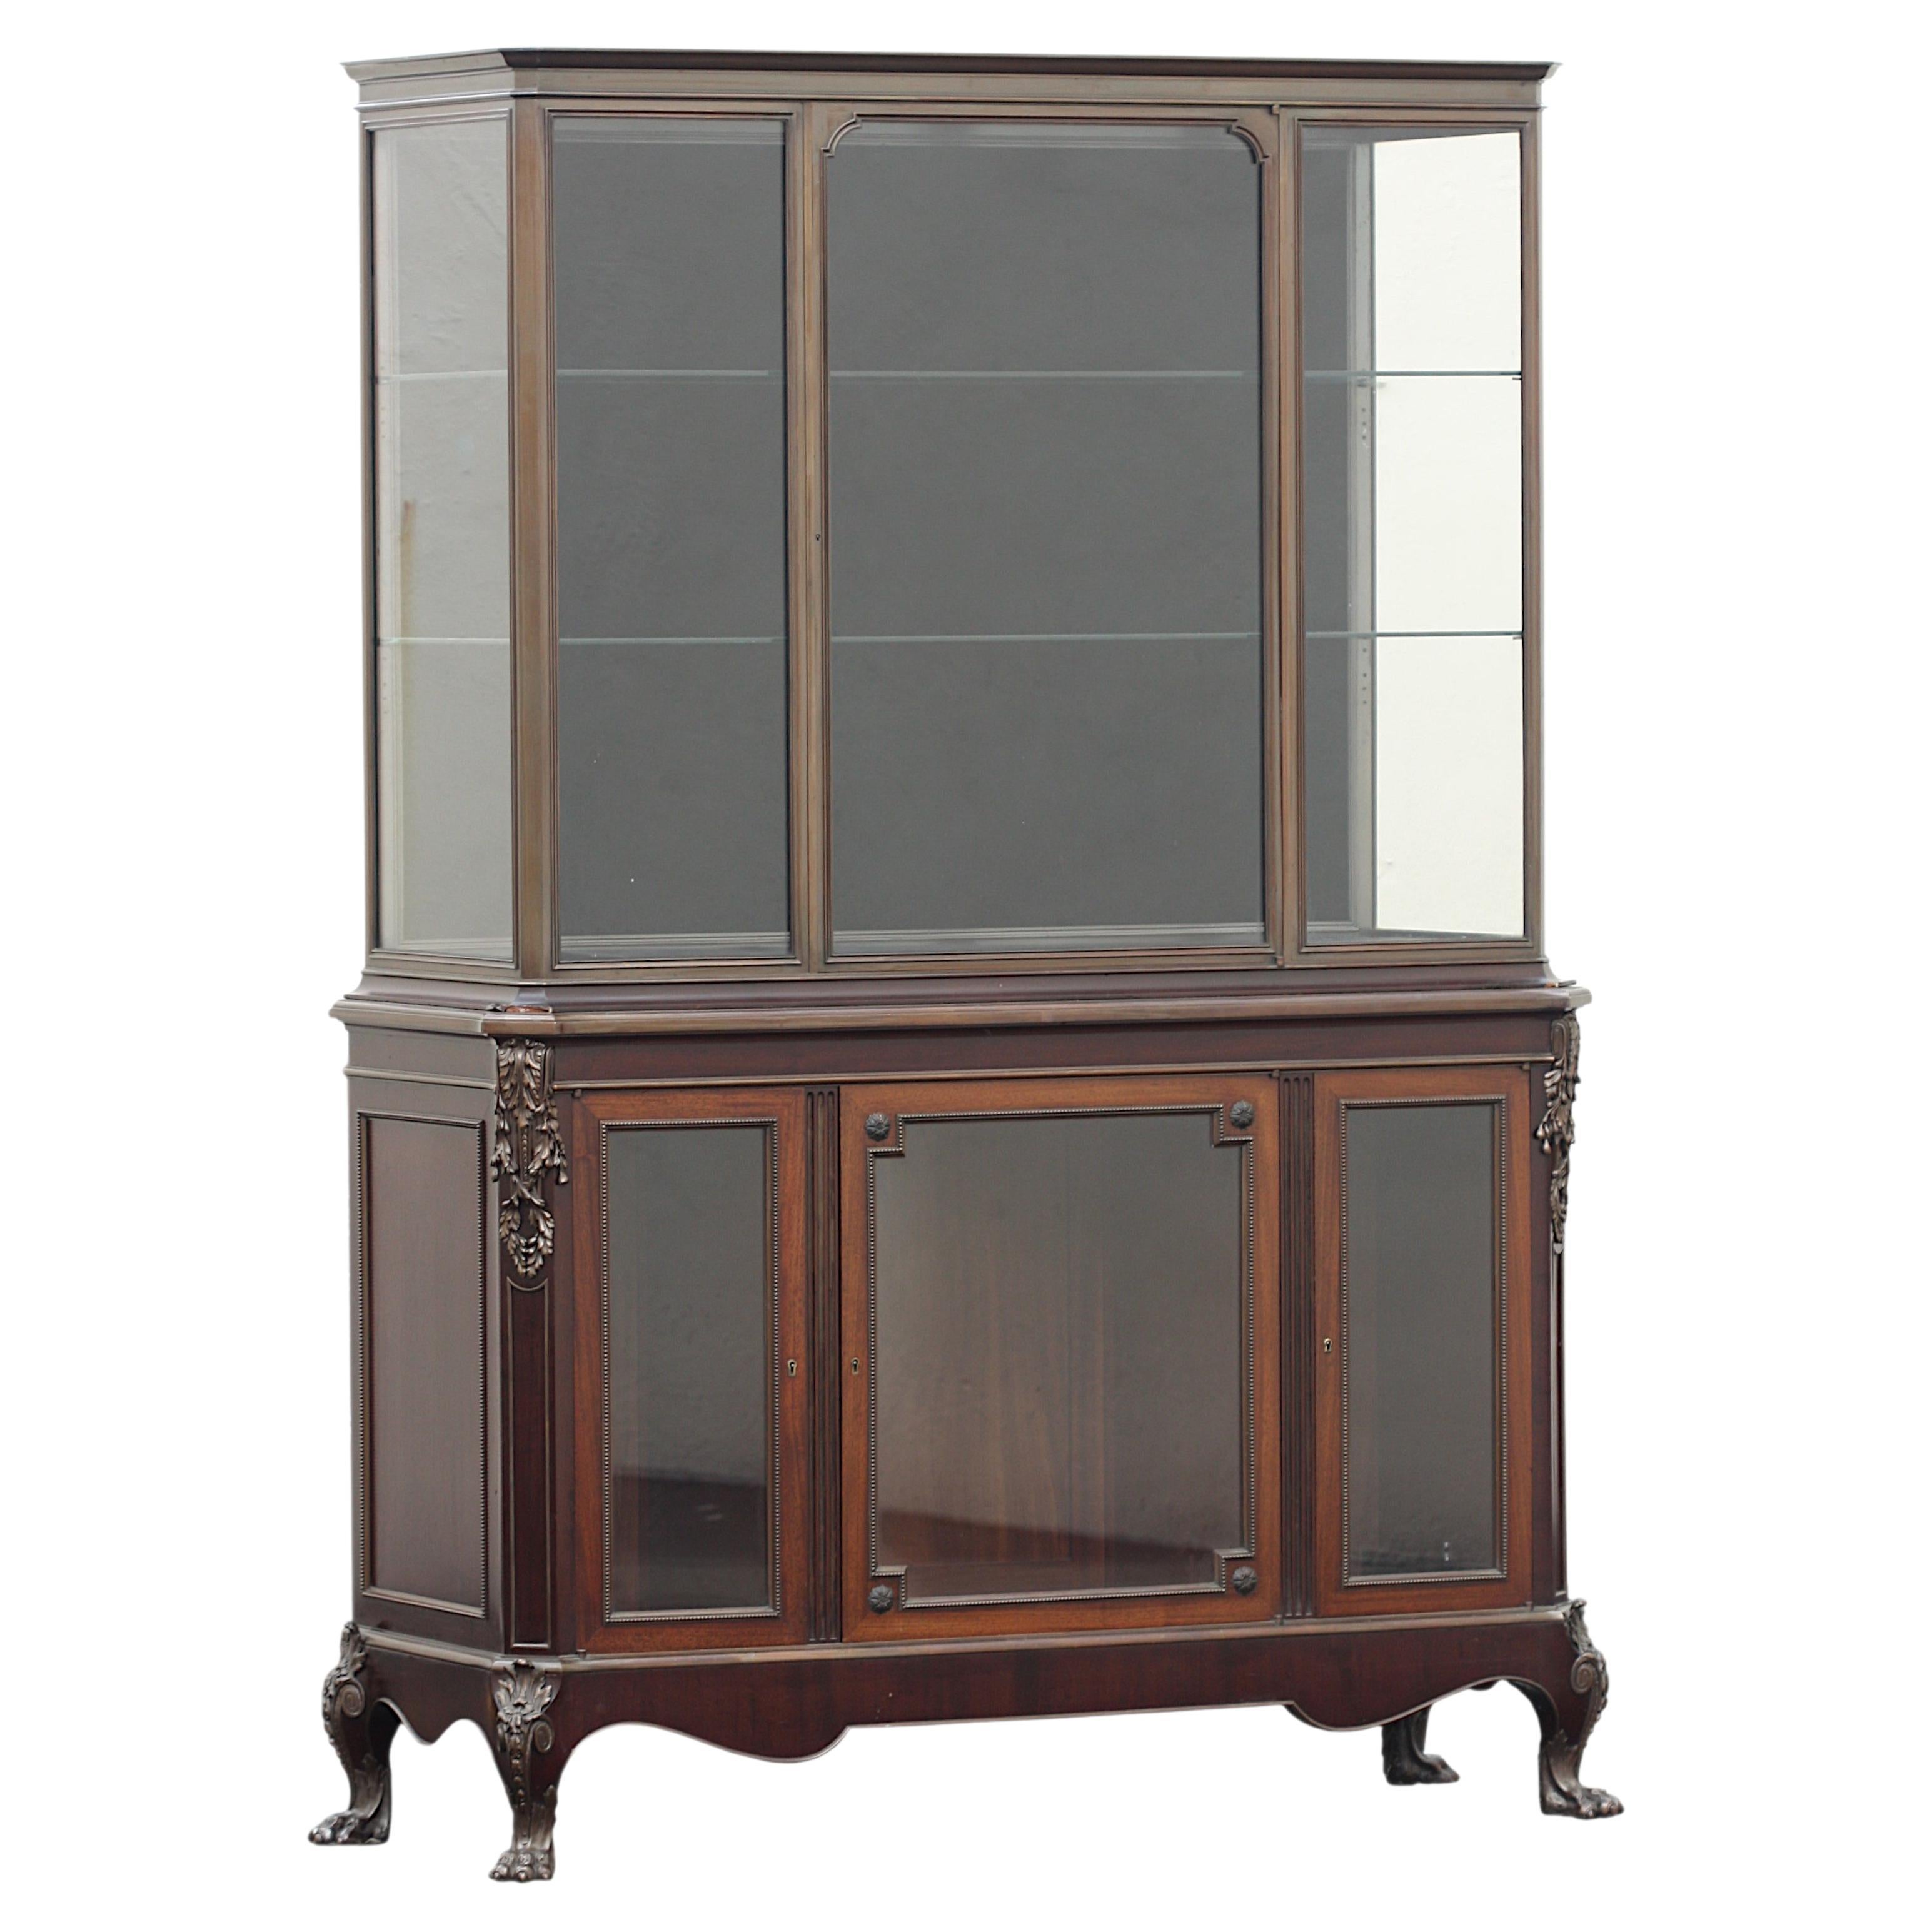  Henry DASSON (1825-1896) Vitrine signed and dated Henry Dasson & Cie, 1889  For Sale